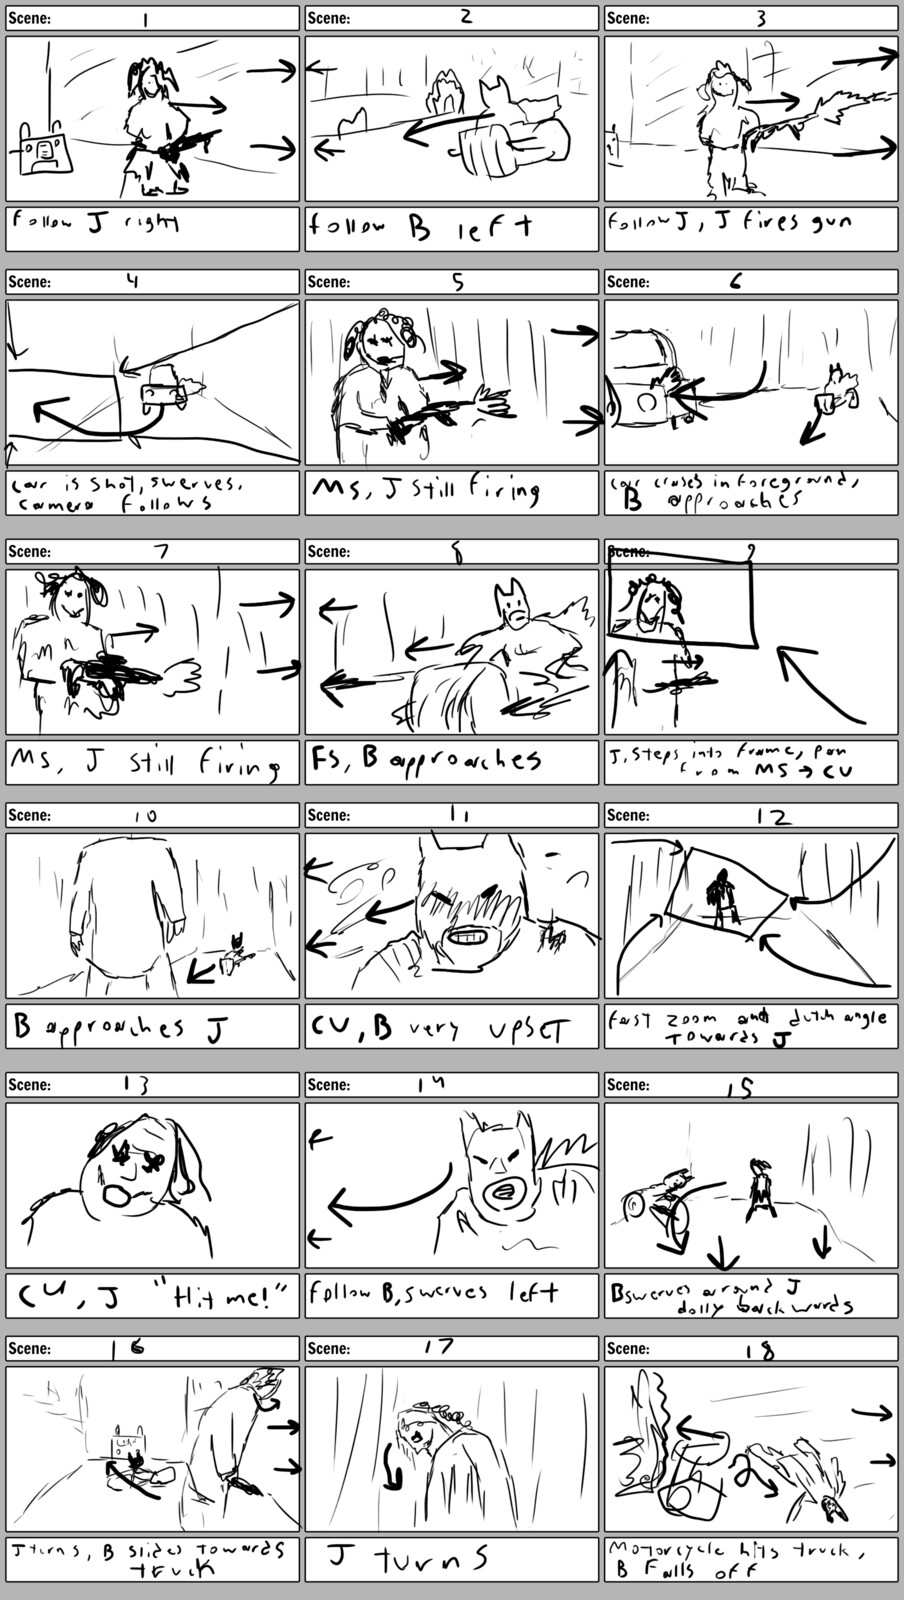 I sketched a storyboard frame of each shot in the sequence